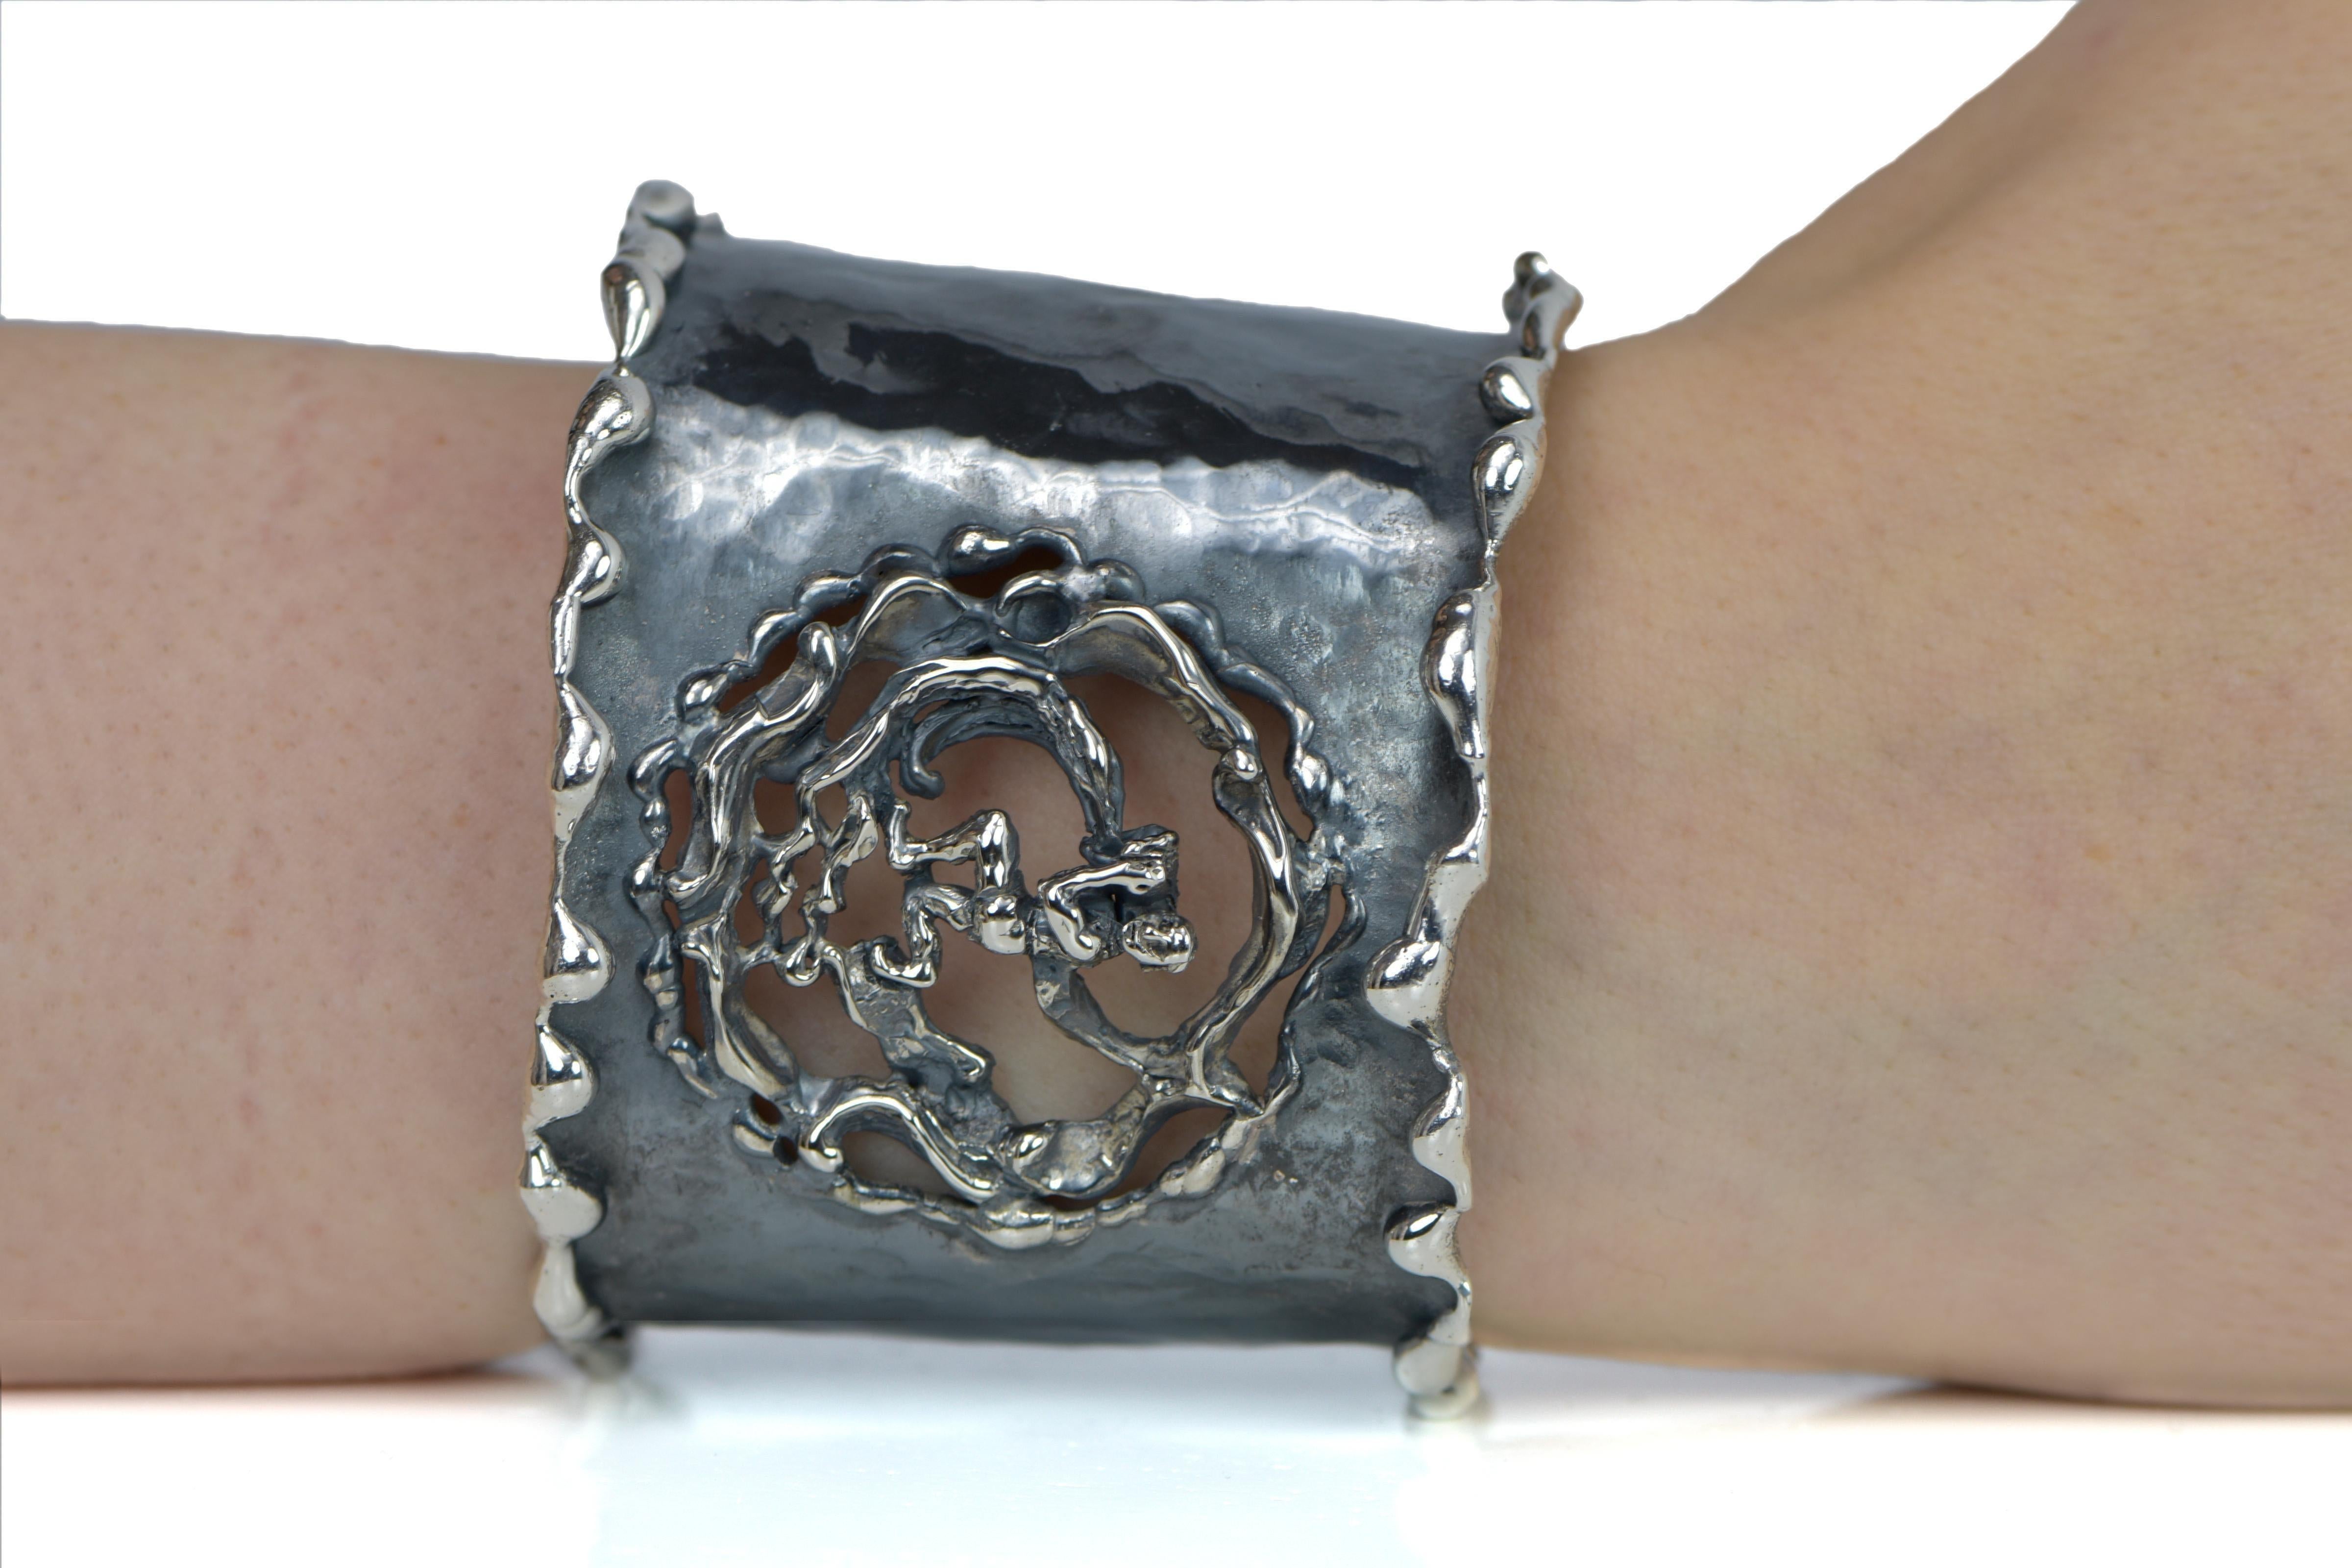 Hand Forged Silver Aquarius Adjustable Cuff Bracelet. About 2.5 inches wide. The metal does not contain any additional alloys that could compromise the strength or quality of the piece. Each Organic Silver Cuff Bracelet takes about 8 hours to